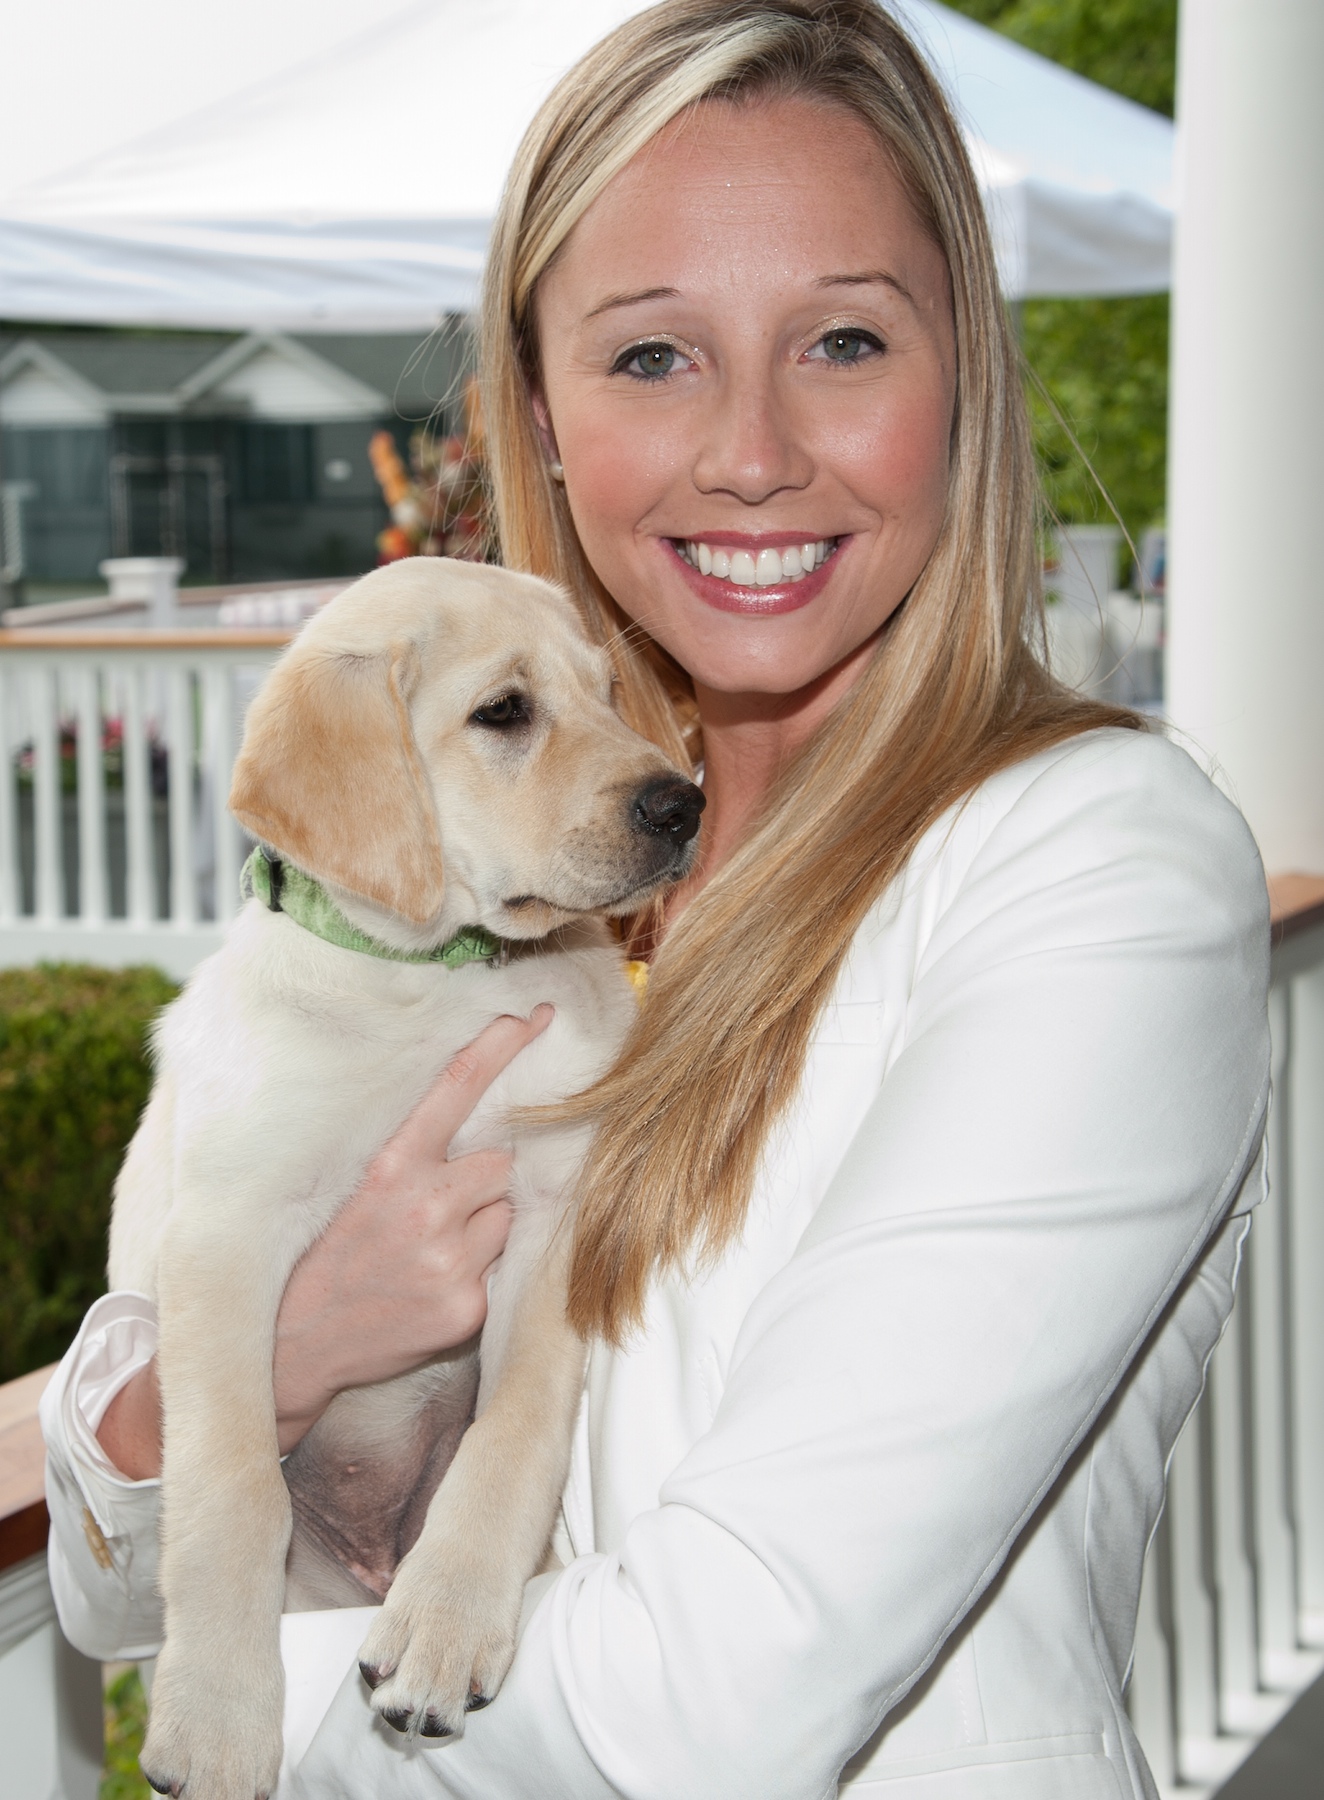 Guiding Eyes for the Blind’s Volunteer of the Year, London Nielsen, will be honored at the 37th annual Guiding Eyes Golf Classic on June 9.